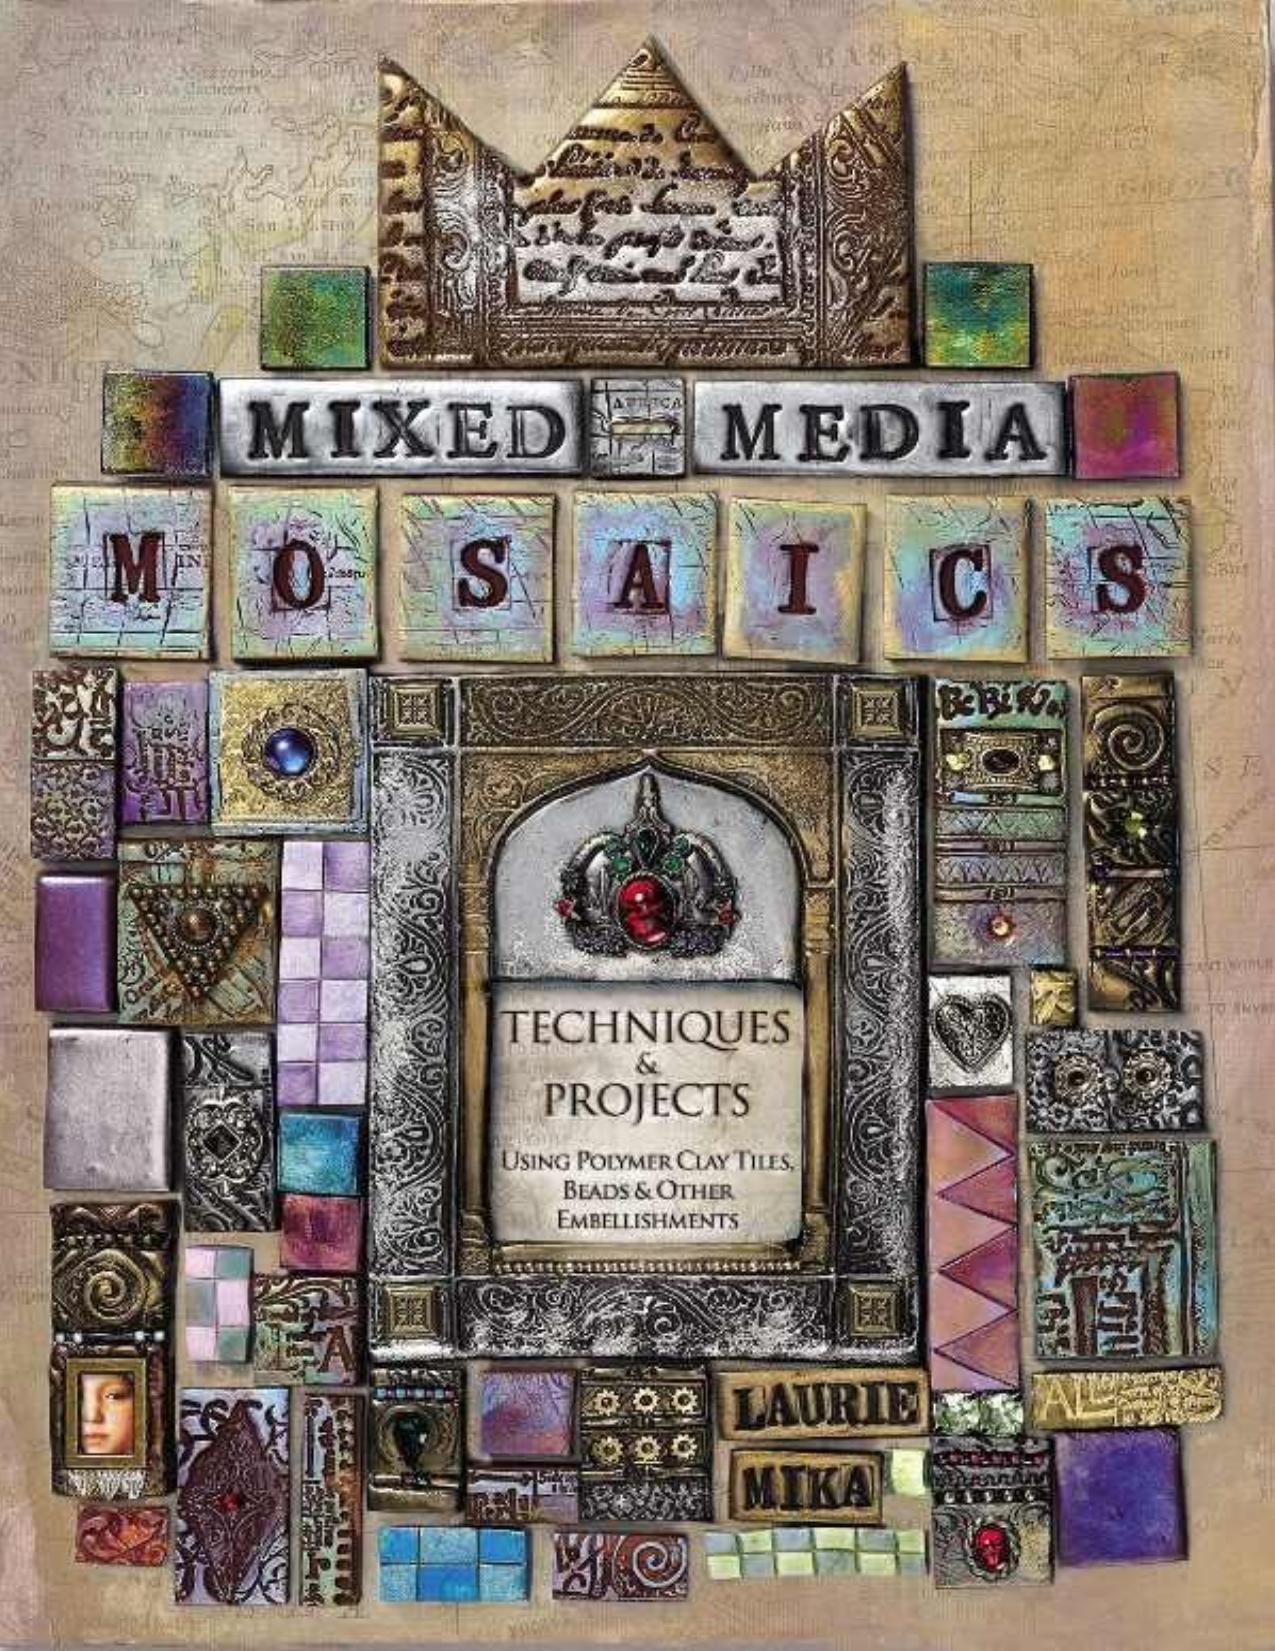 Mixed-Media Mosaics: Techniques and Projects Using Polymer Clay Tiles, Beads & Other Embellishments by Laurie Mika